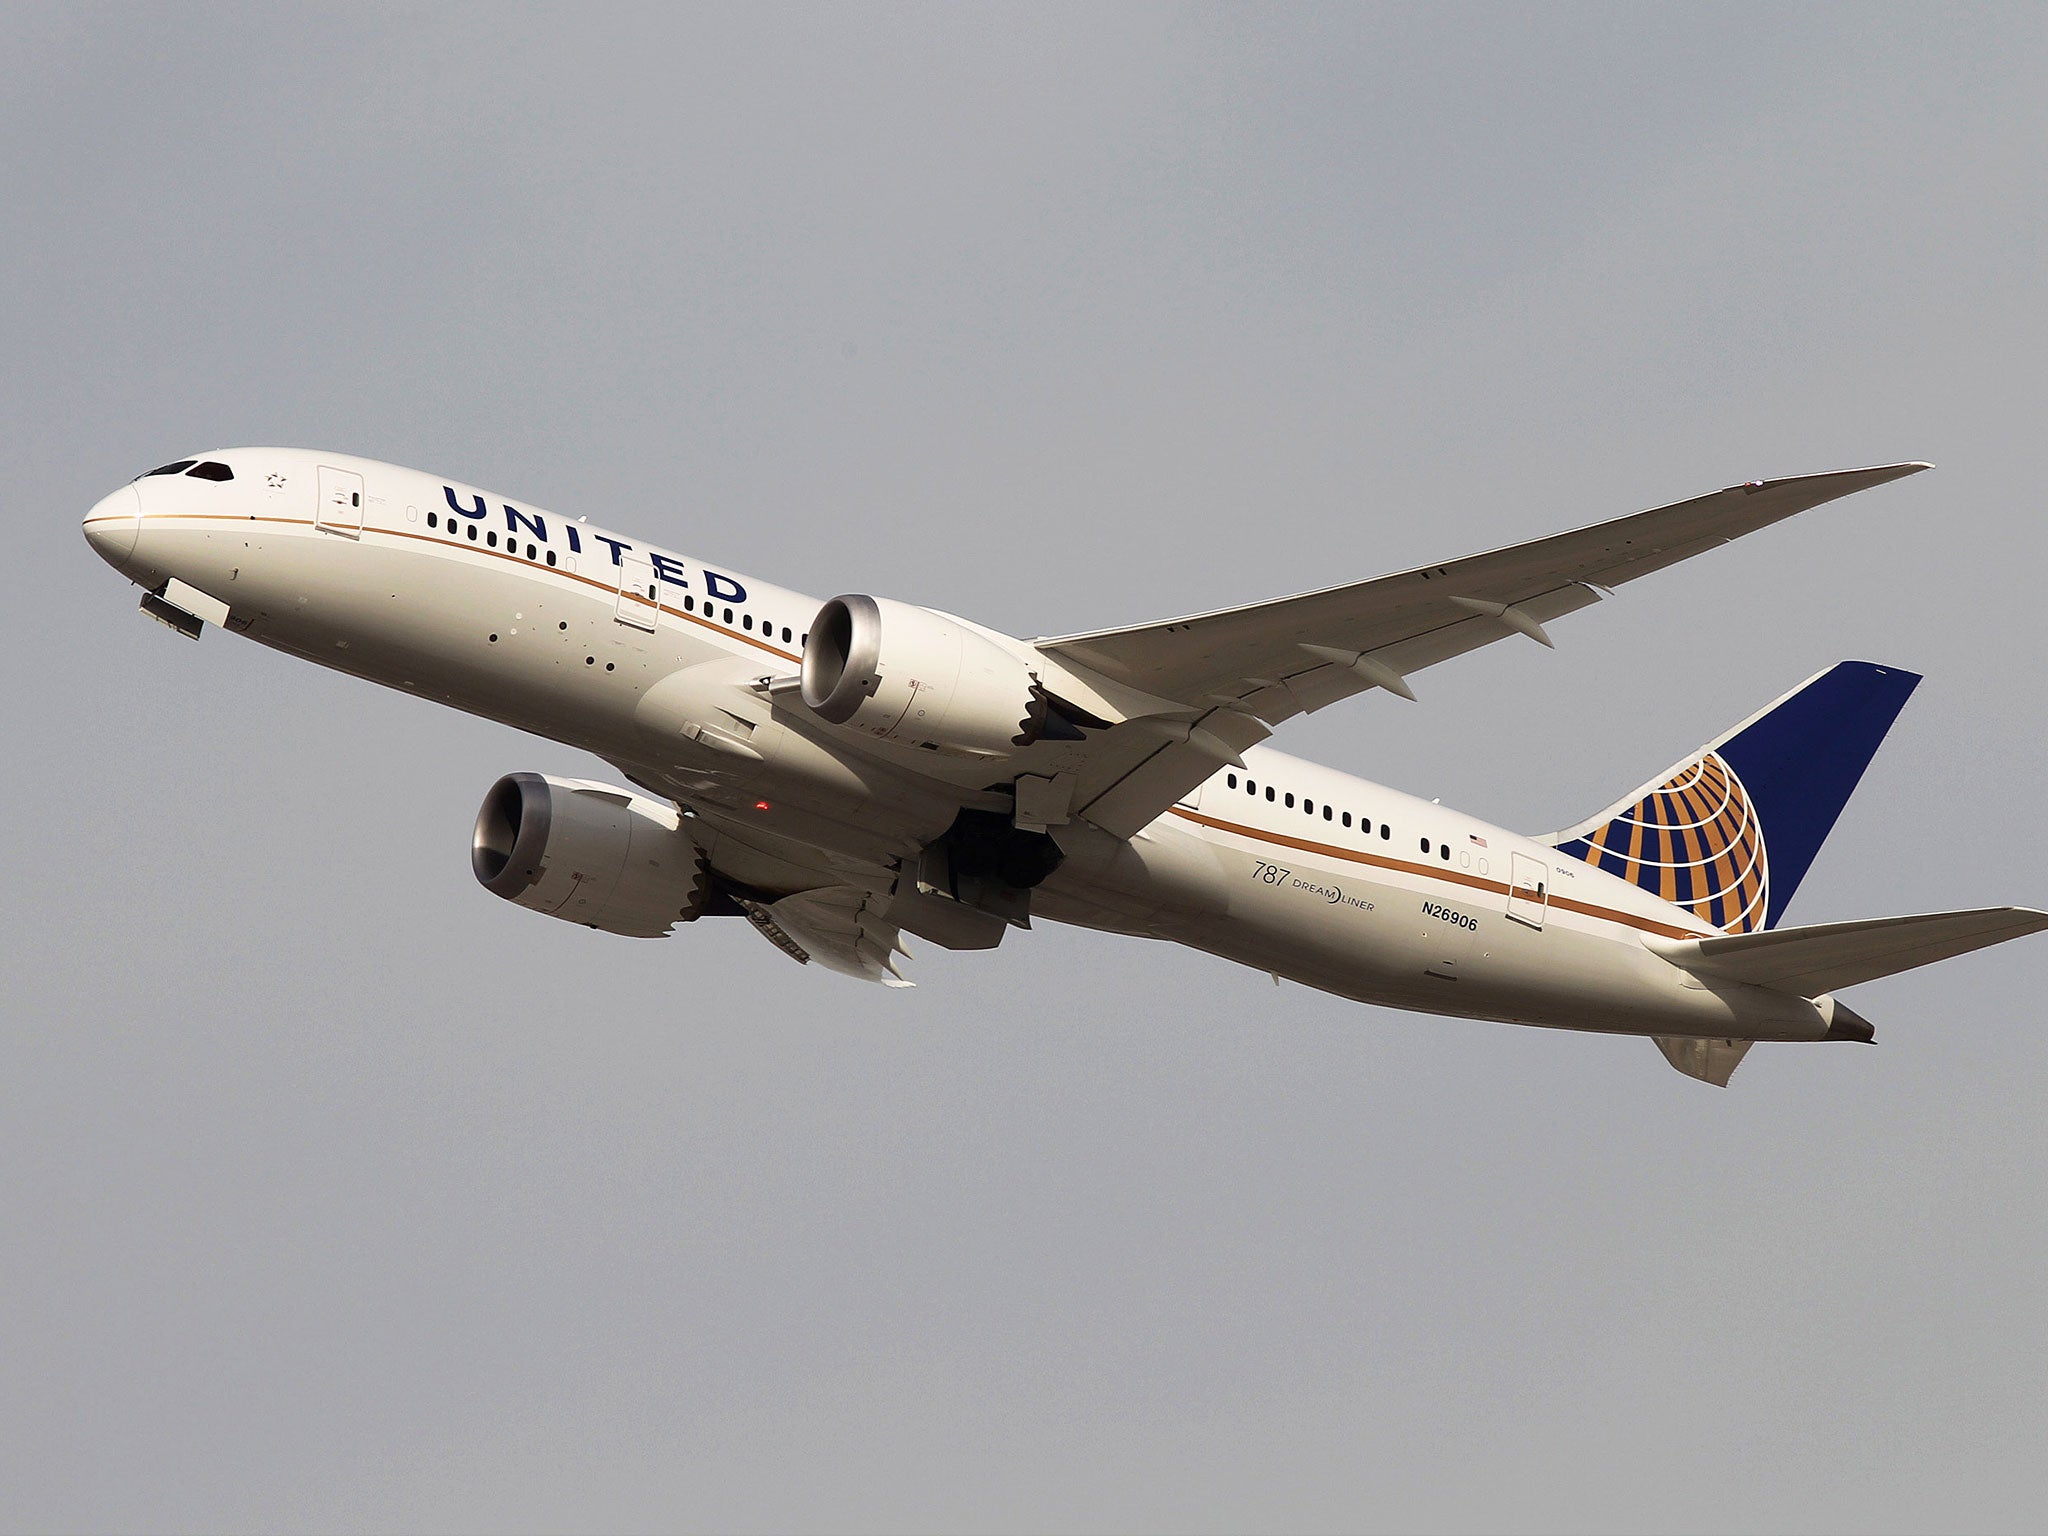 United's new route is 18 miles longer than the existing Qantas route from Dallas to Sydney